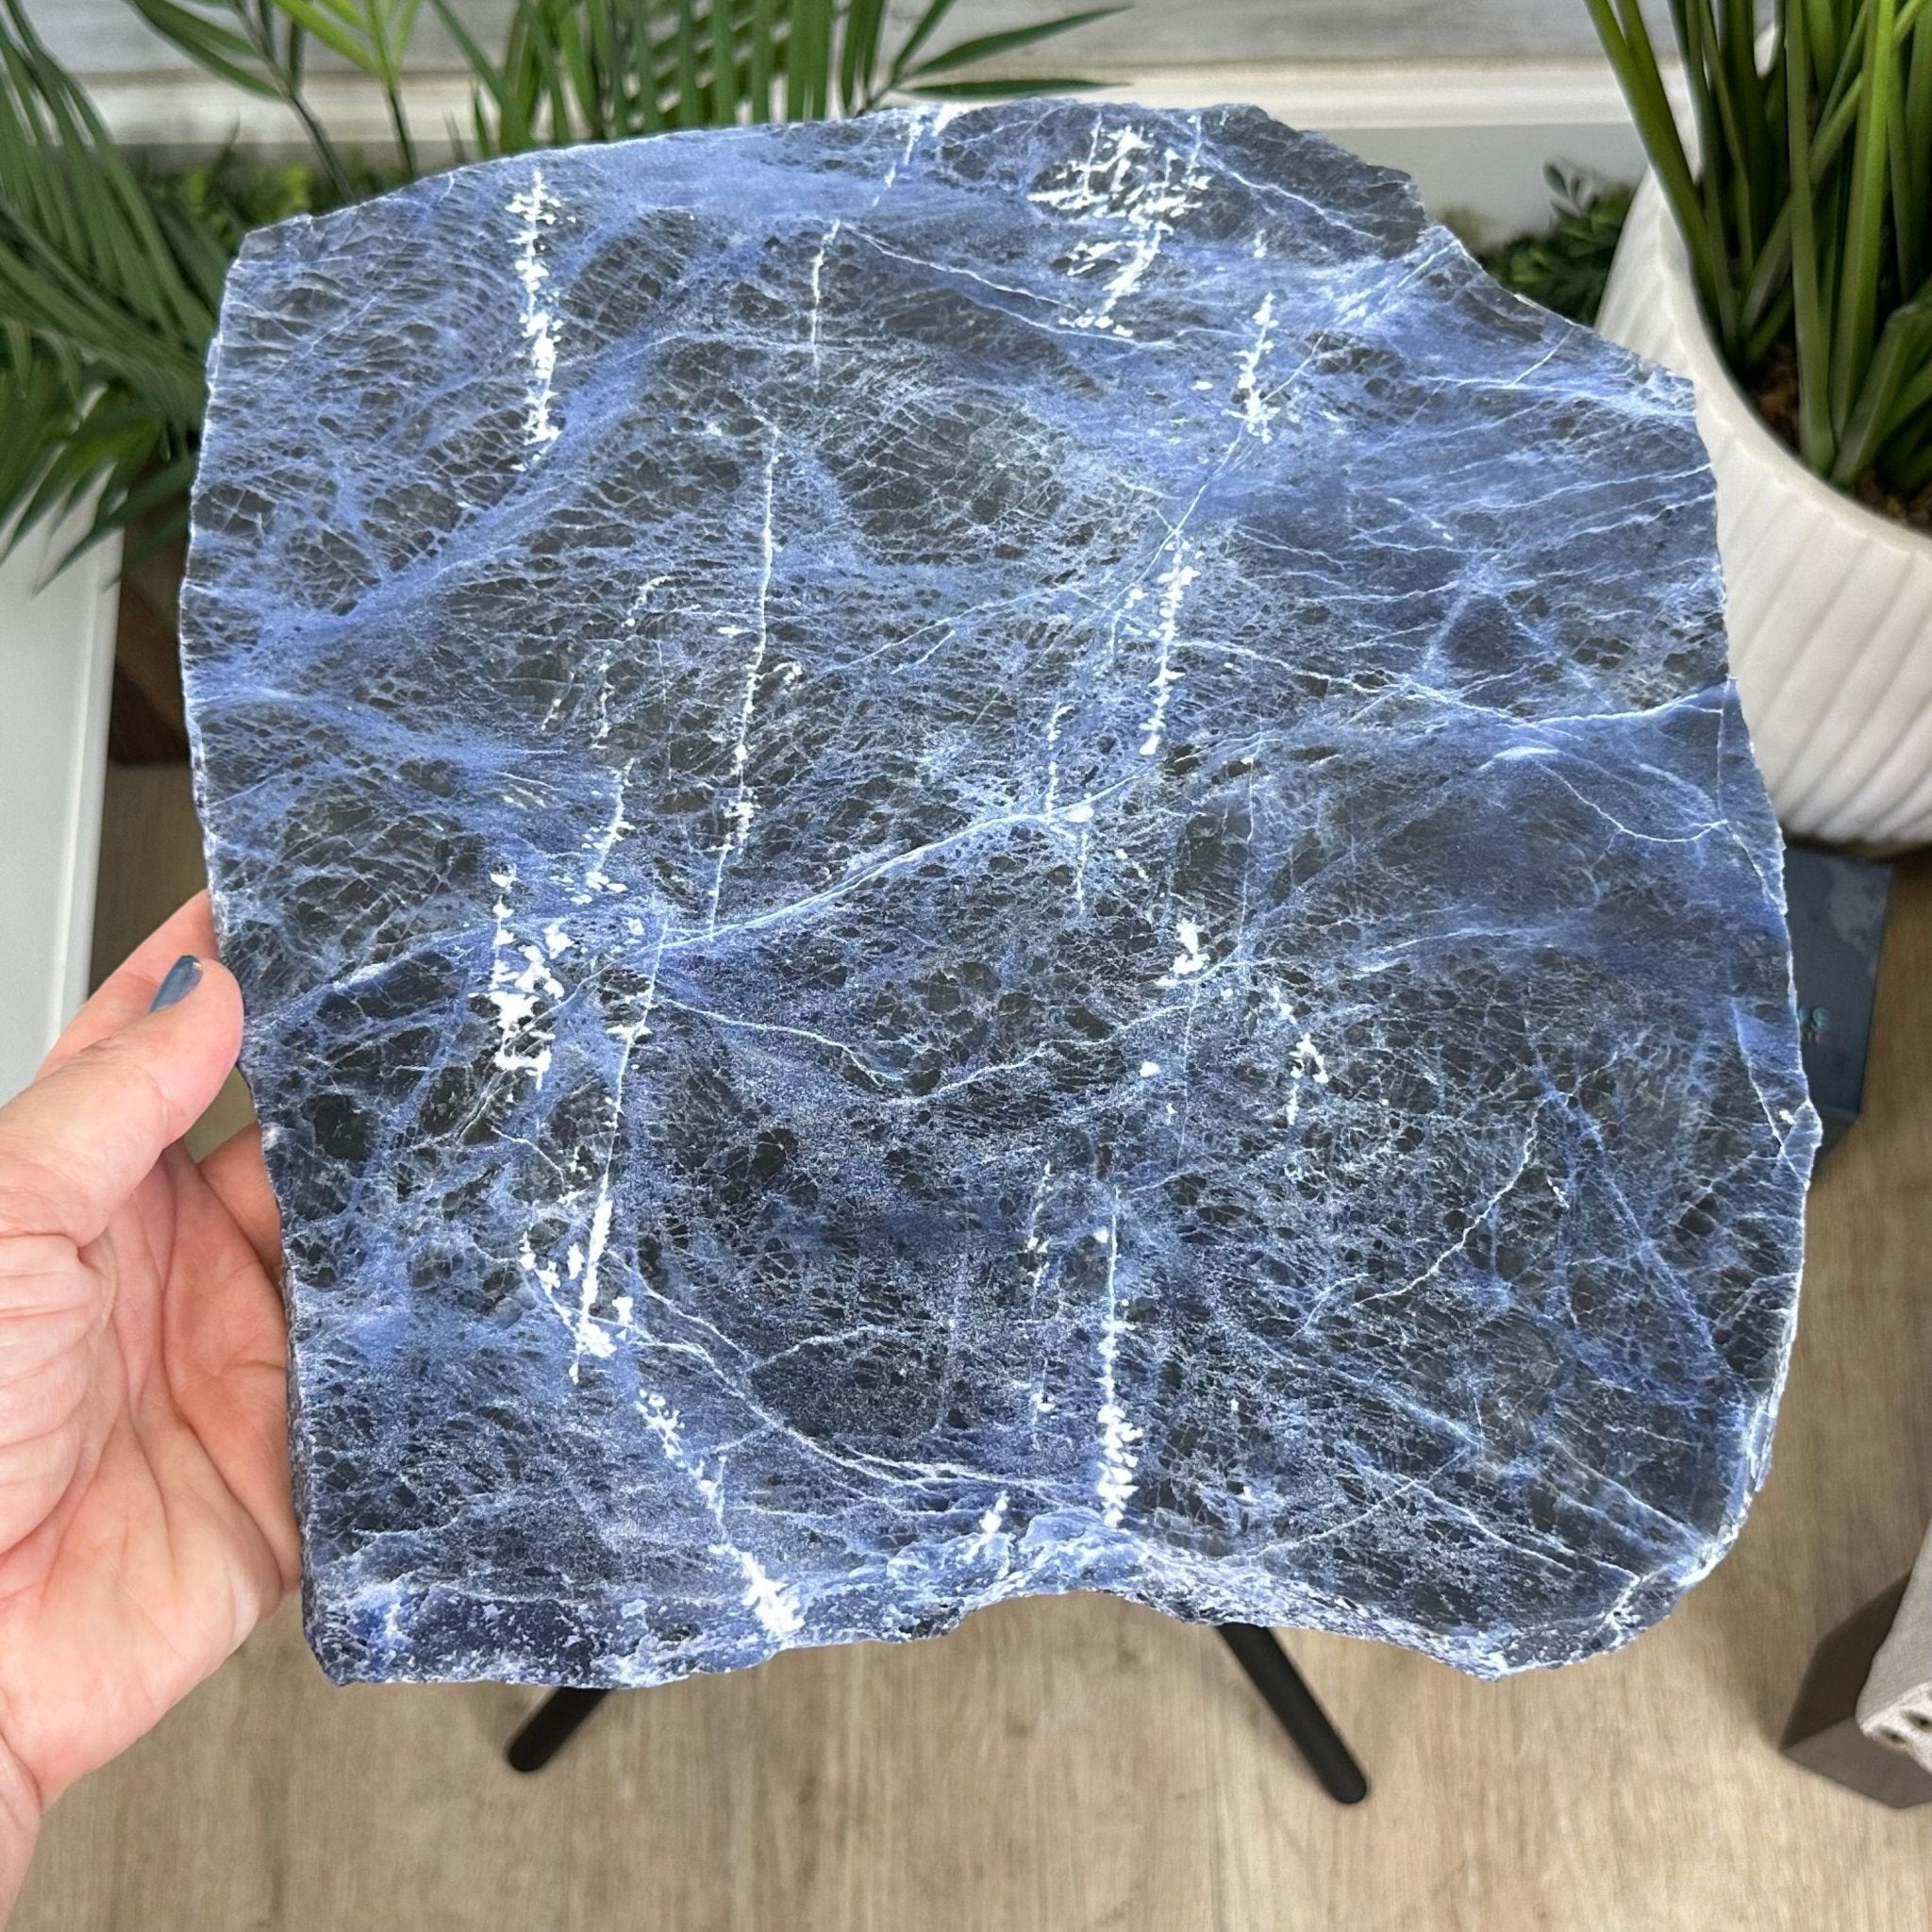 Natural Sodalite Side Table on Black Metal Base, 24.7" Tall #1342SO-002 - Brazil GemsBrazil GemsNatural Sodalite Side Table on Black Metal Base, 24.7" Tall #1342SO-002Tables: Side1342SO-002